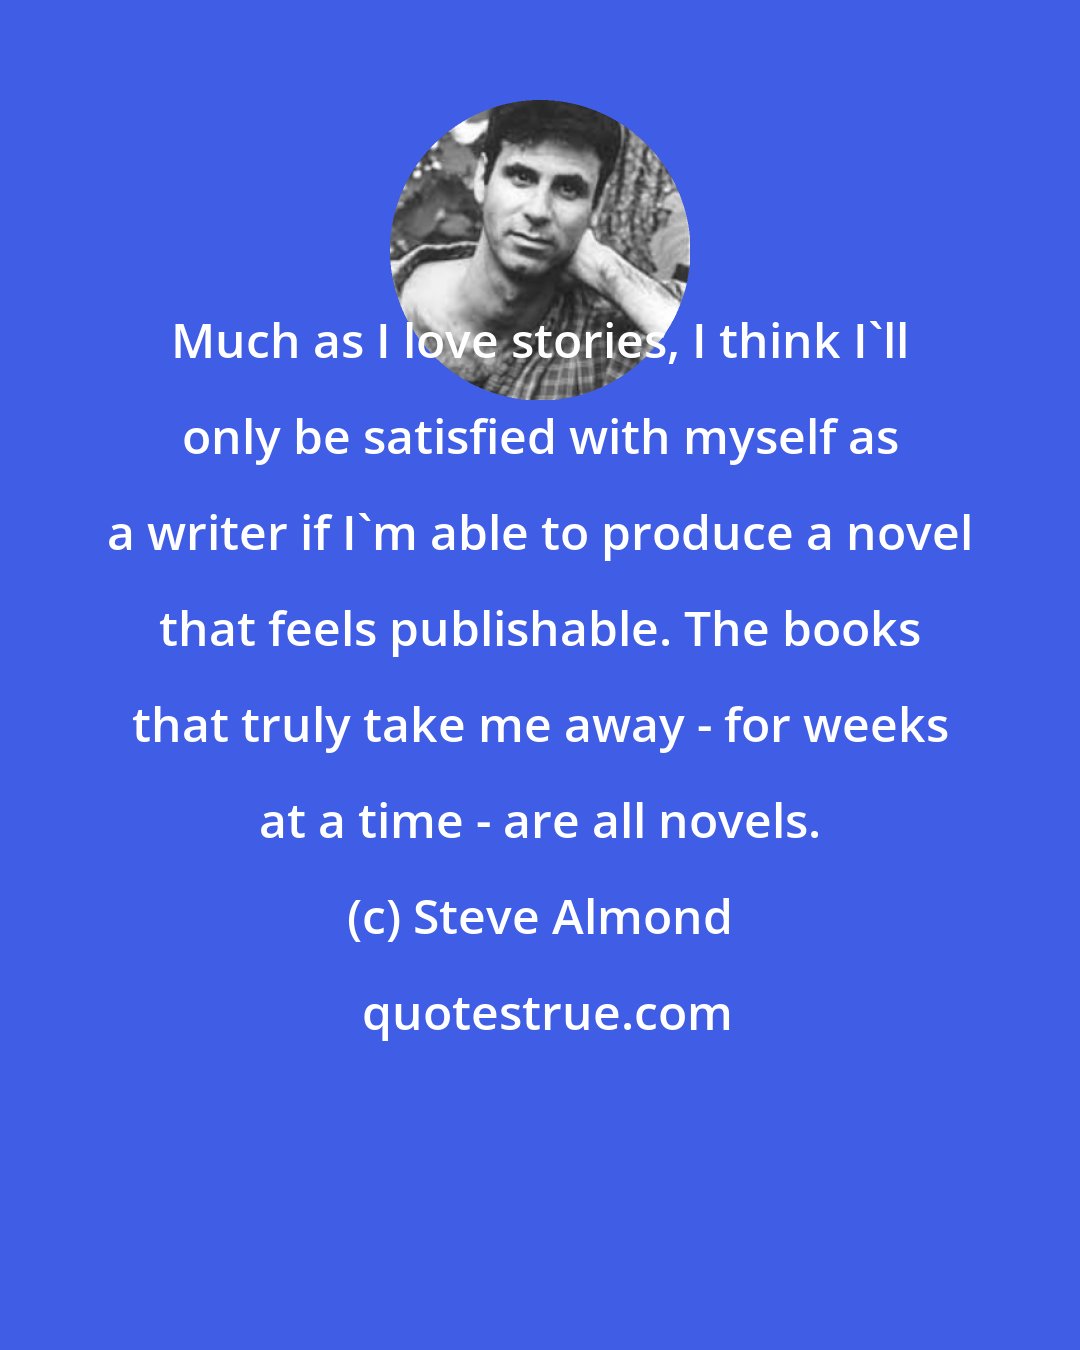 Steve Almond: Much as I love stories, I think I'll only be satisfied with myself as a writer if I'm able to produce a novel that feels publishable. The books that truly take me away - for weeks at a time - are all novels.